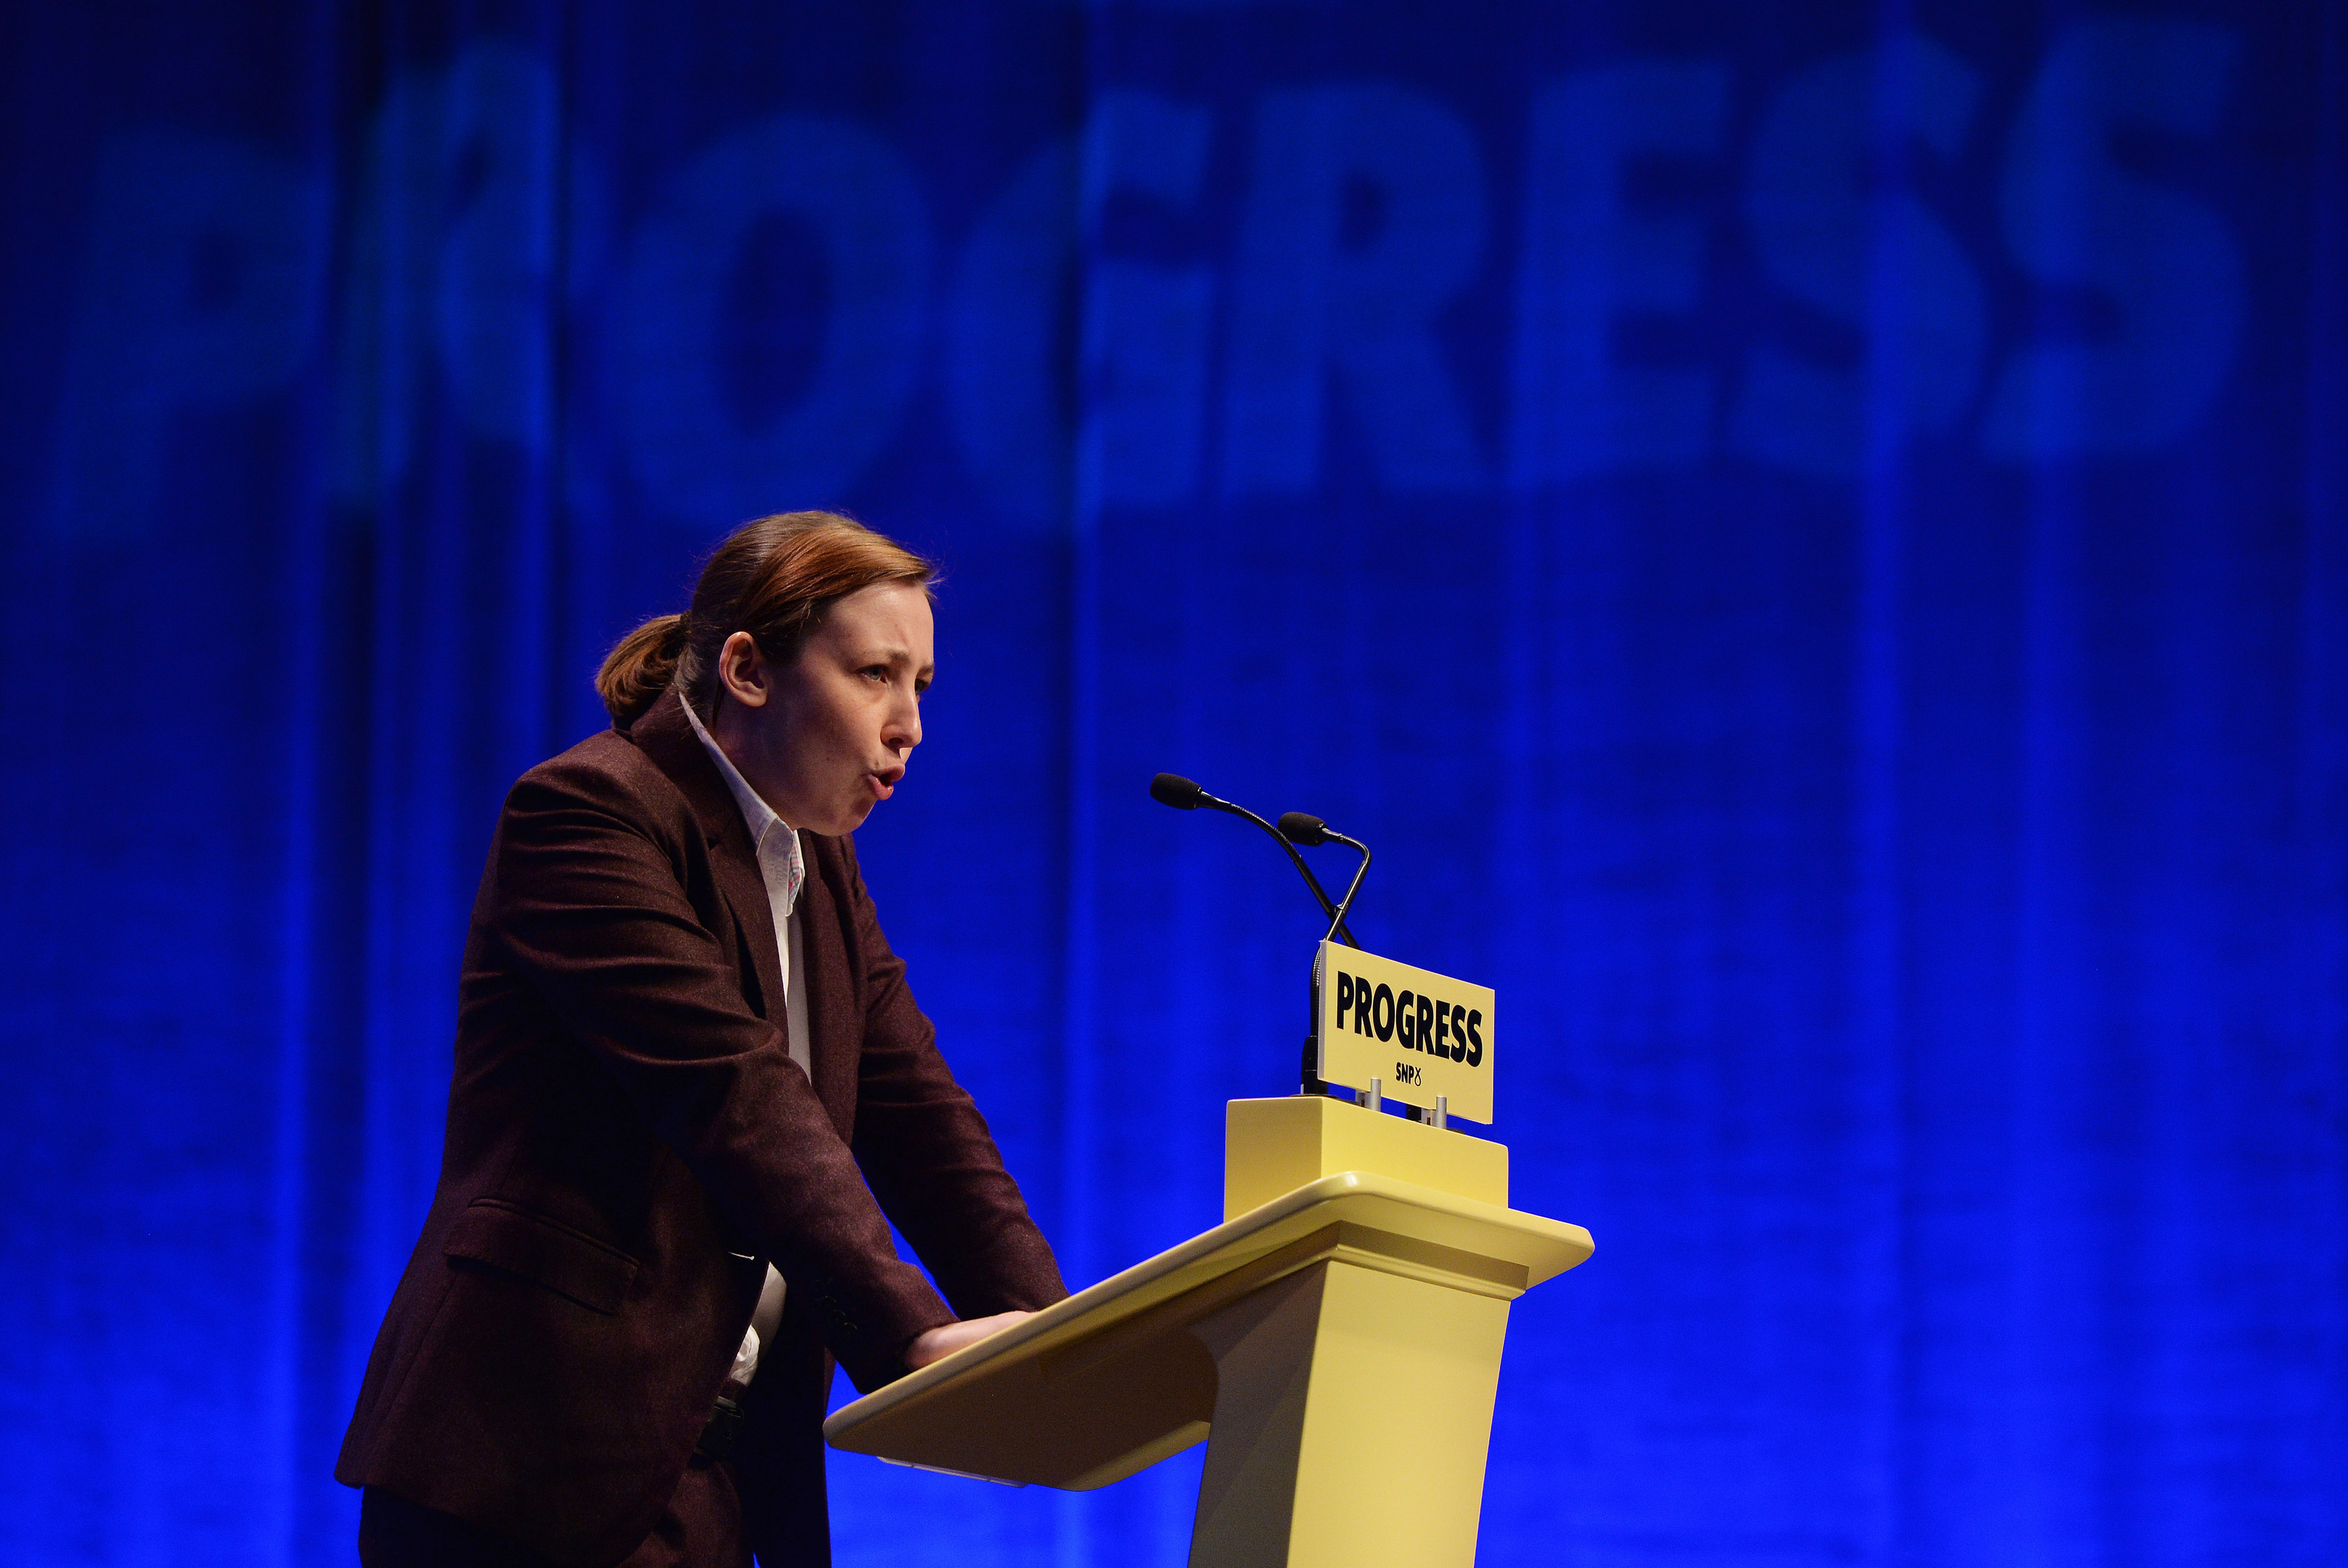 Mhairi Black MP, speaks to delegates ahead of First Minister & SNP Leader Nicola Sturgeon's keynote speech at The SNP Autumn Conference 2017 at the Scottish Exhibition and Conference Centre on October 10, 2017 in Glasgow, Scotland. (Mark Runnacles/Getty Images)